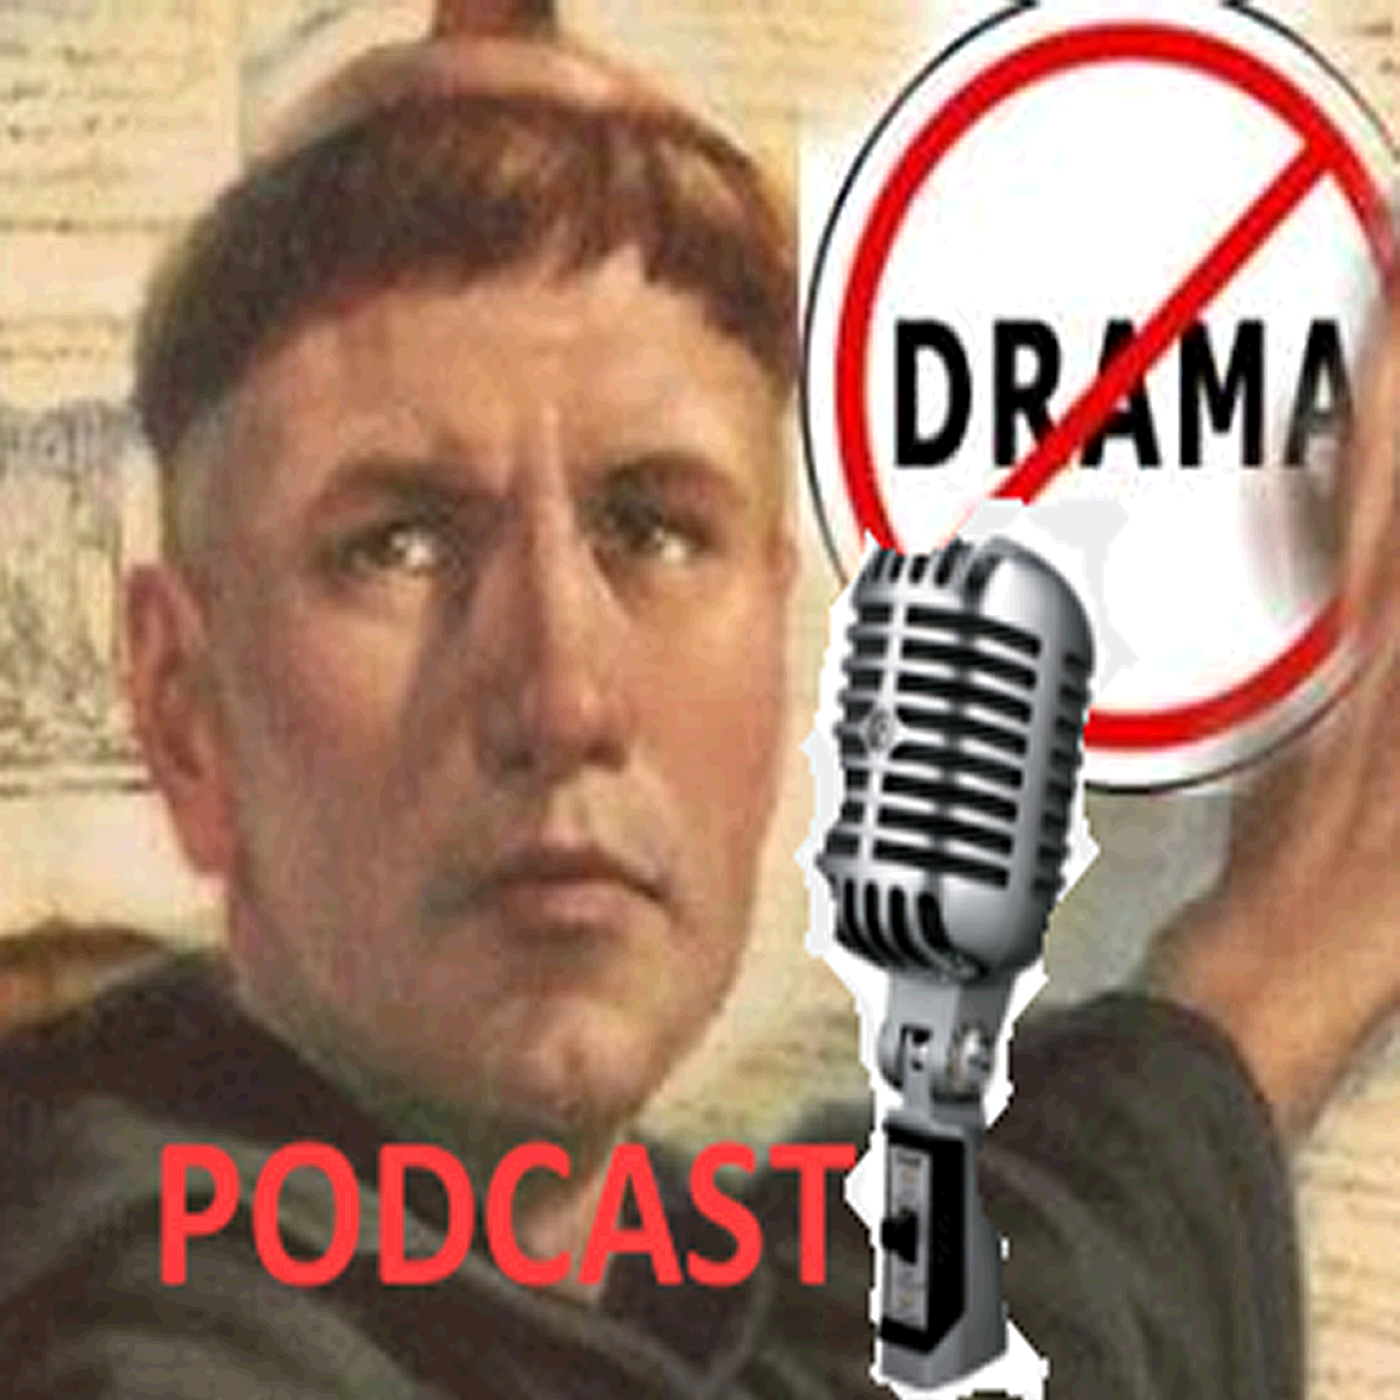 NO DRAMA Podcast - Episode 13: Romans 11:1-10, Father’s Day and THE MAN LIST!